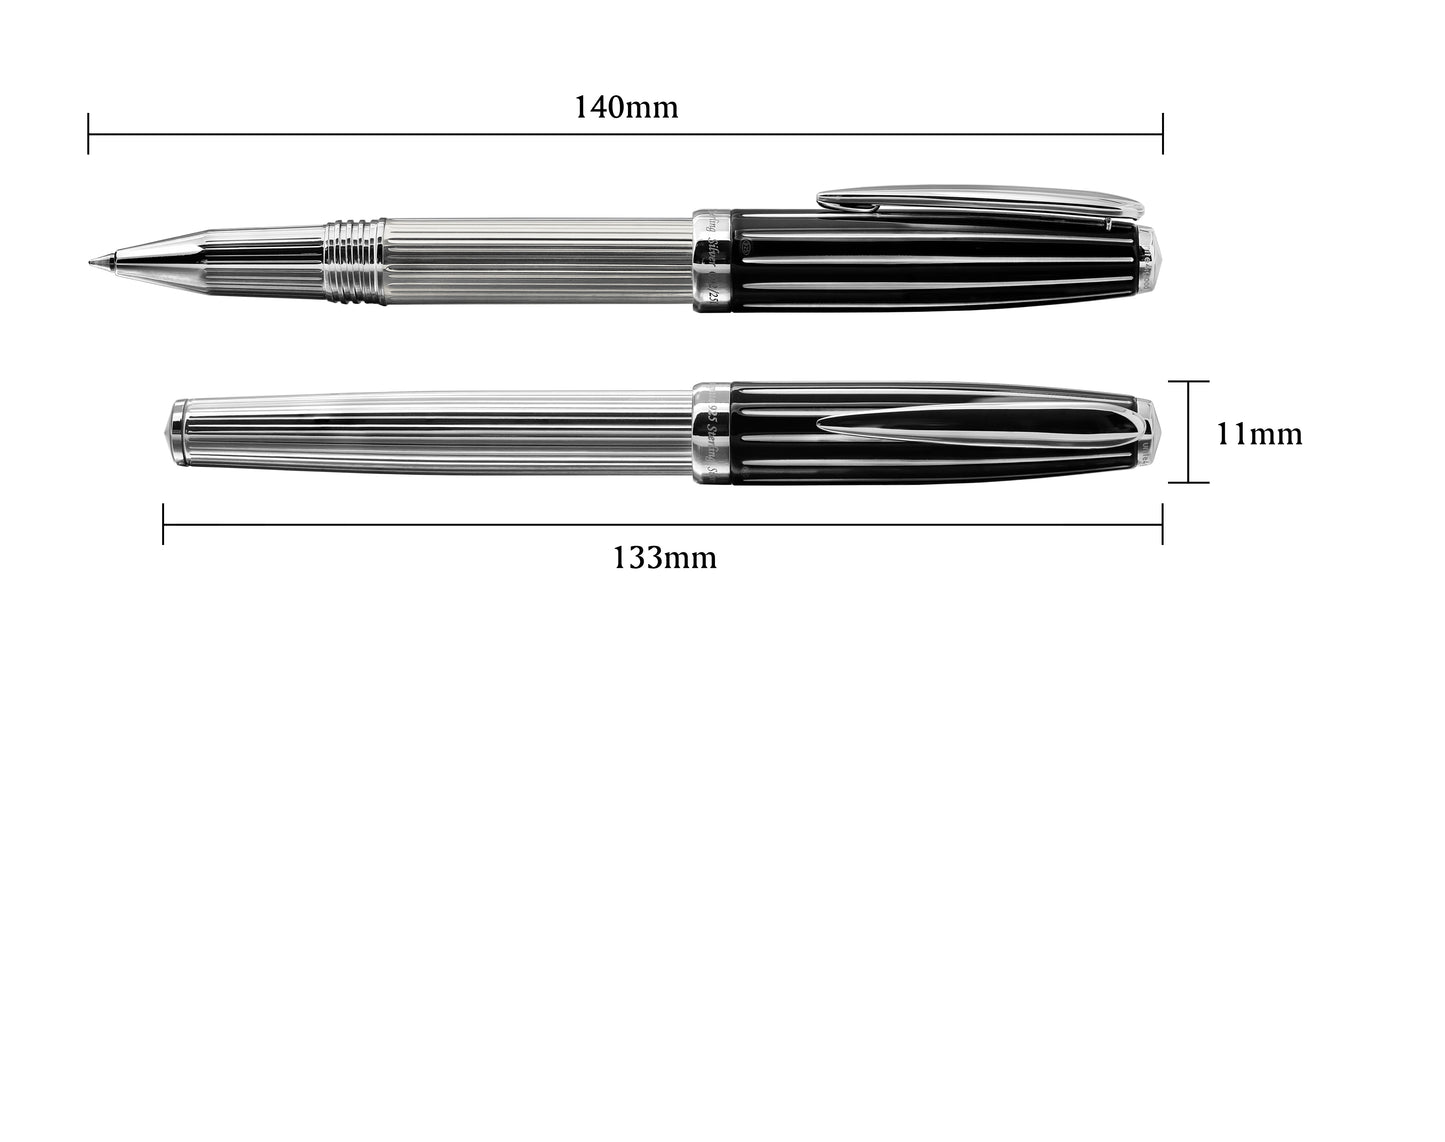 Xezo - Comparison between capped and uncapped Incognito 925 Sterling Silver R rollerball pens. The uncapped fountain pen is 140 mm in length and the capped fountain pen is 133mm in length and 11mm in width.